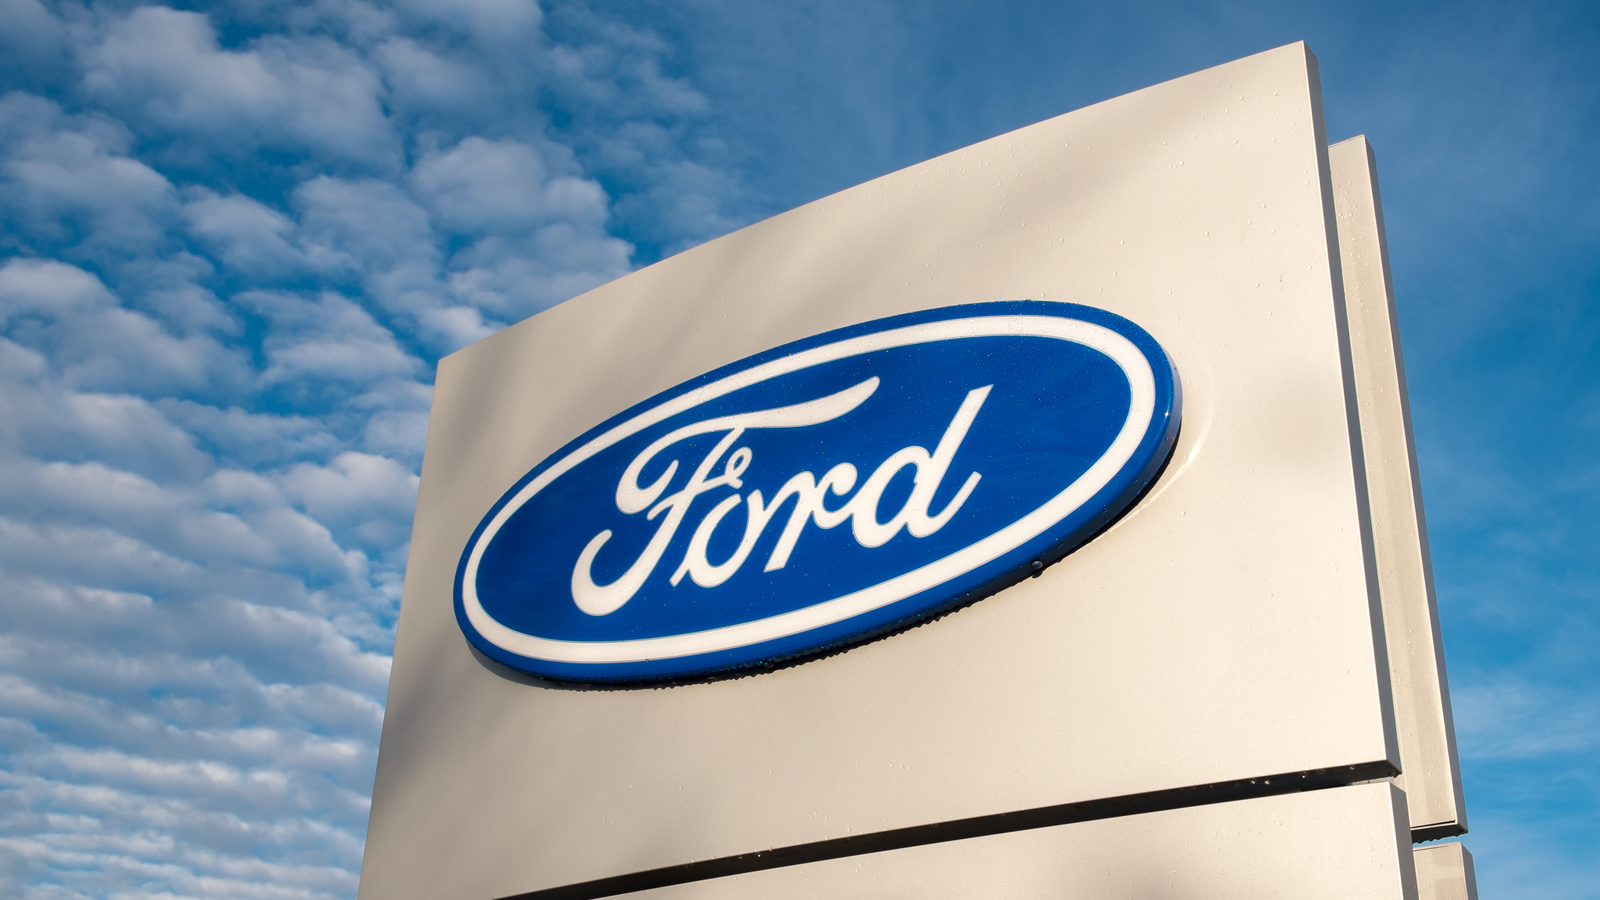 Ford dealership sign against a blue sky representing Ford stock.